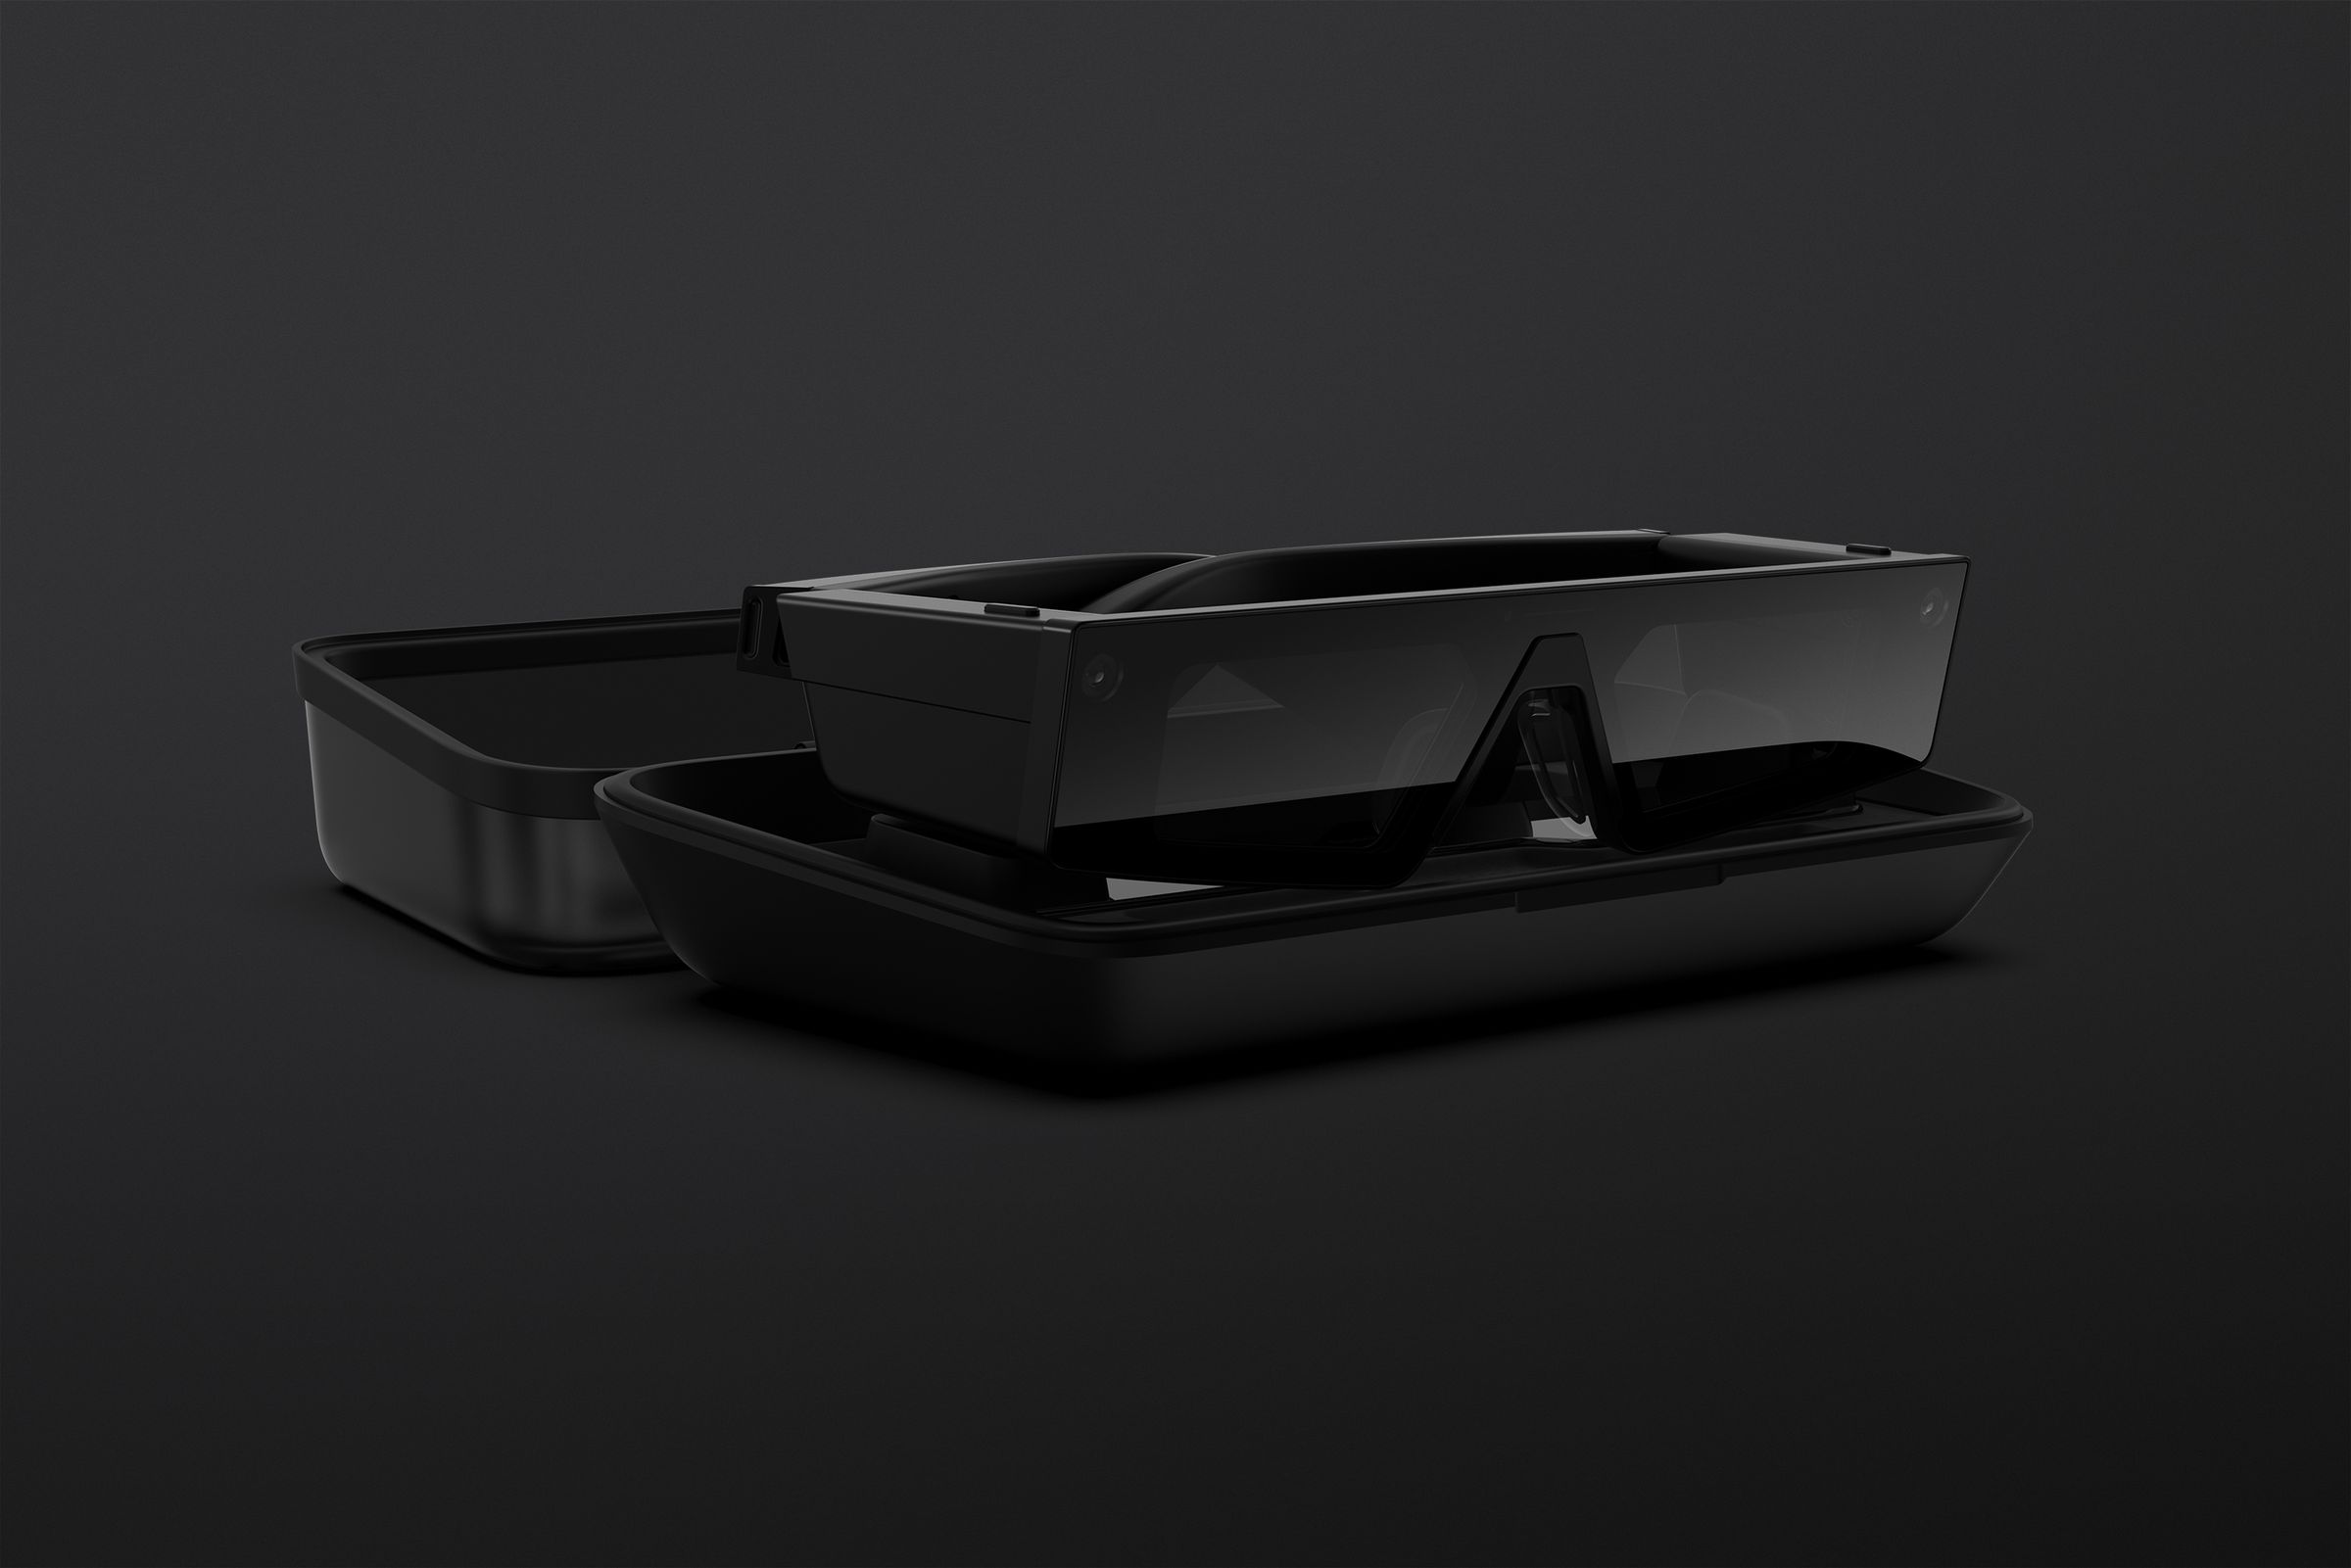 The glasses fold up and fit inside a black charging case.